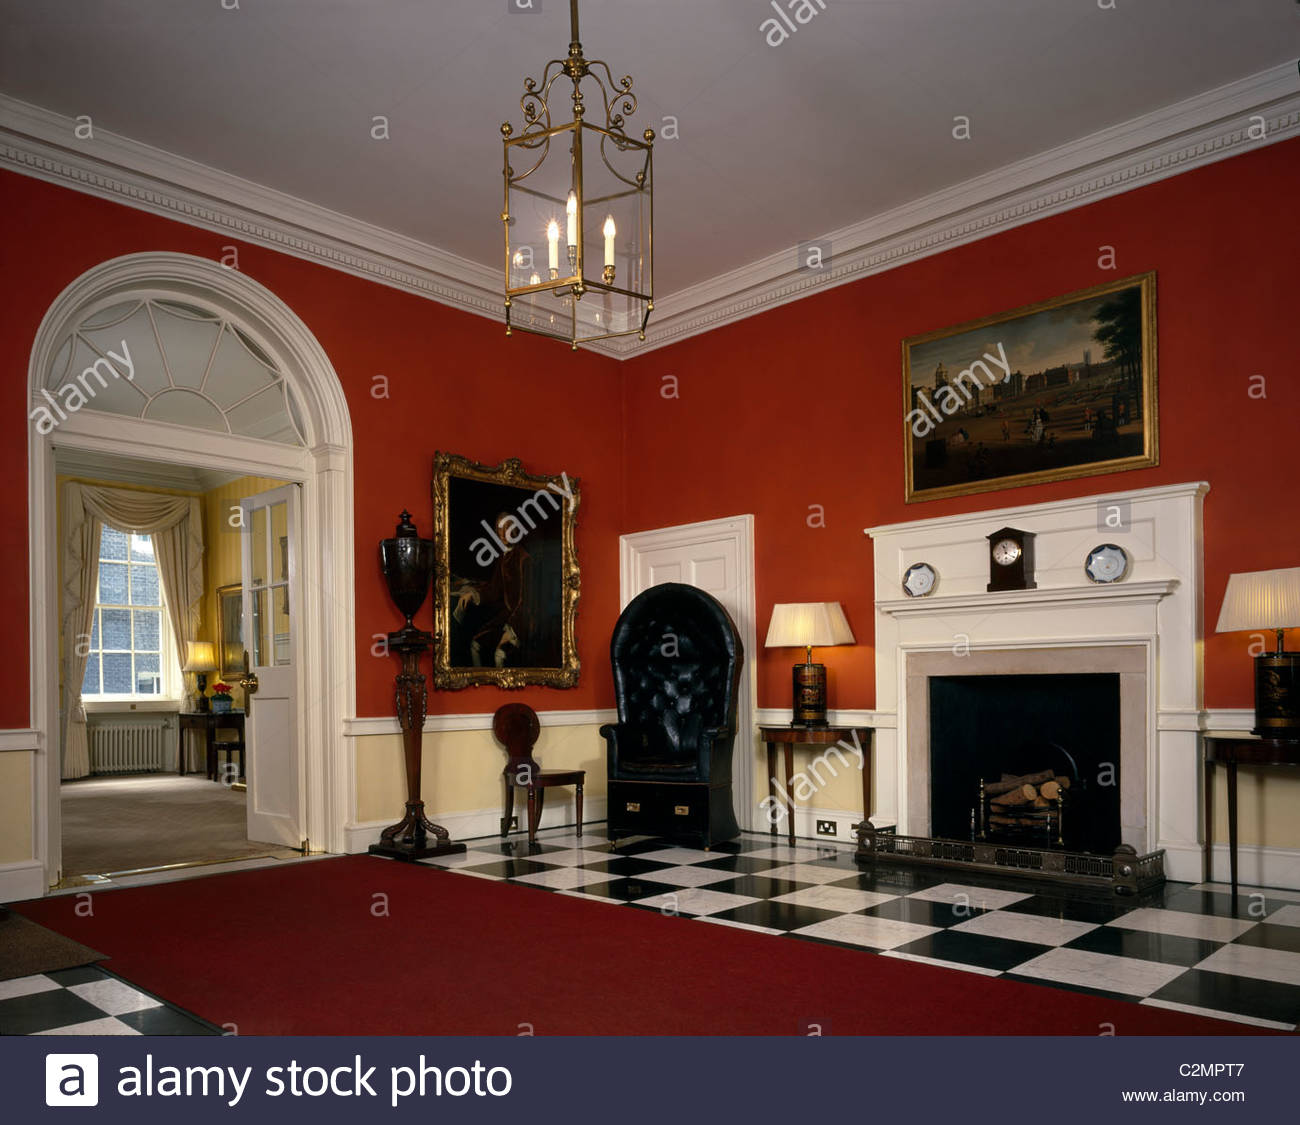 [Image: 10-downing-street-entrance-hall-looking-...C2MPT7.jpg]